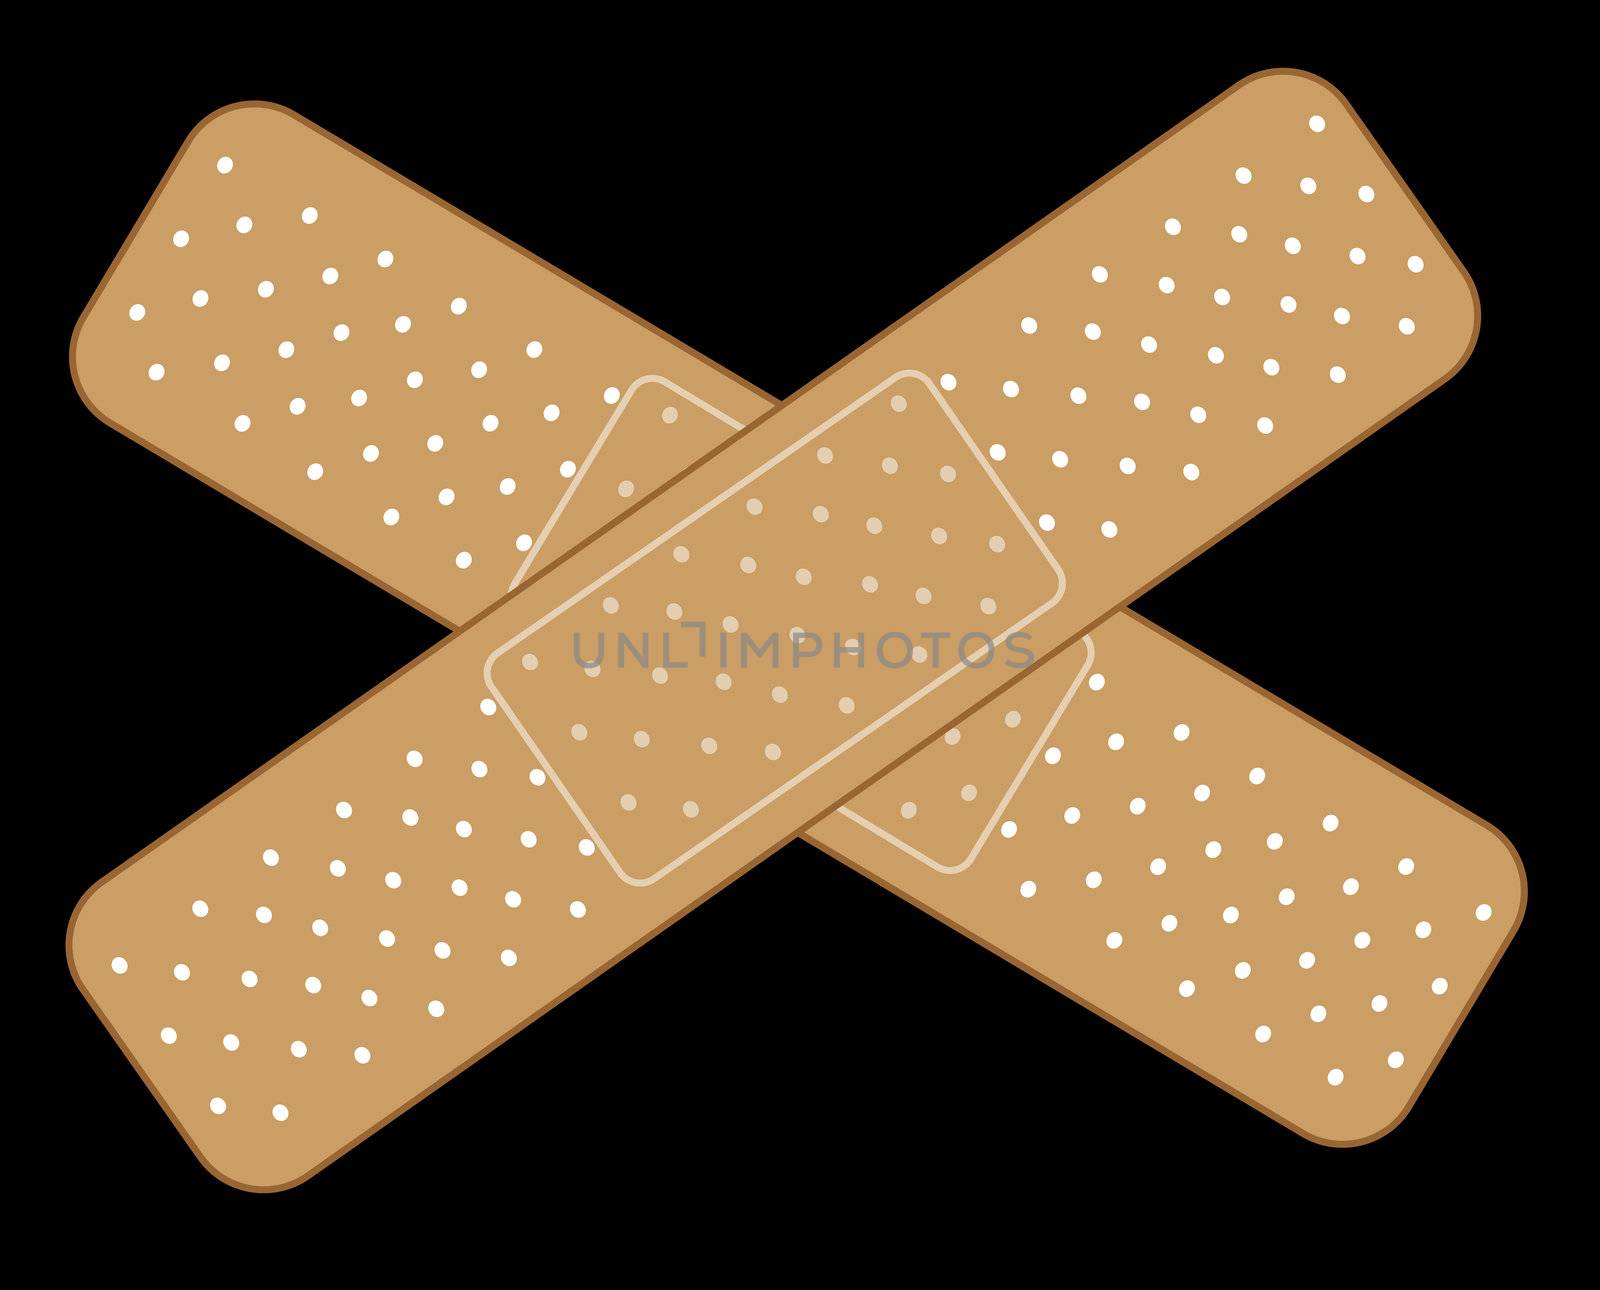 Band Aid Set by peromarketing